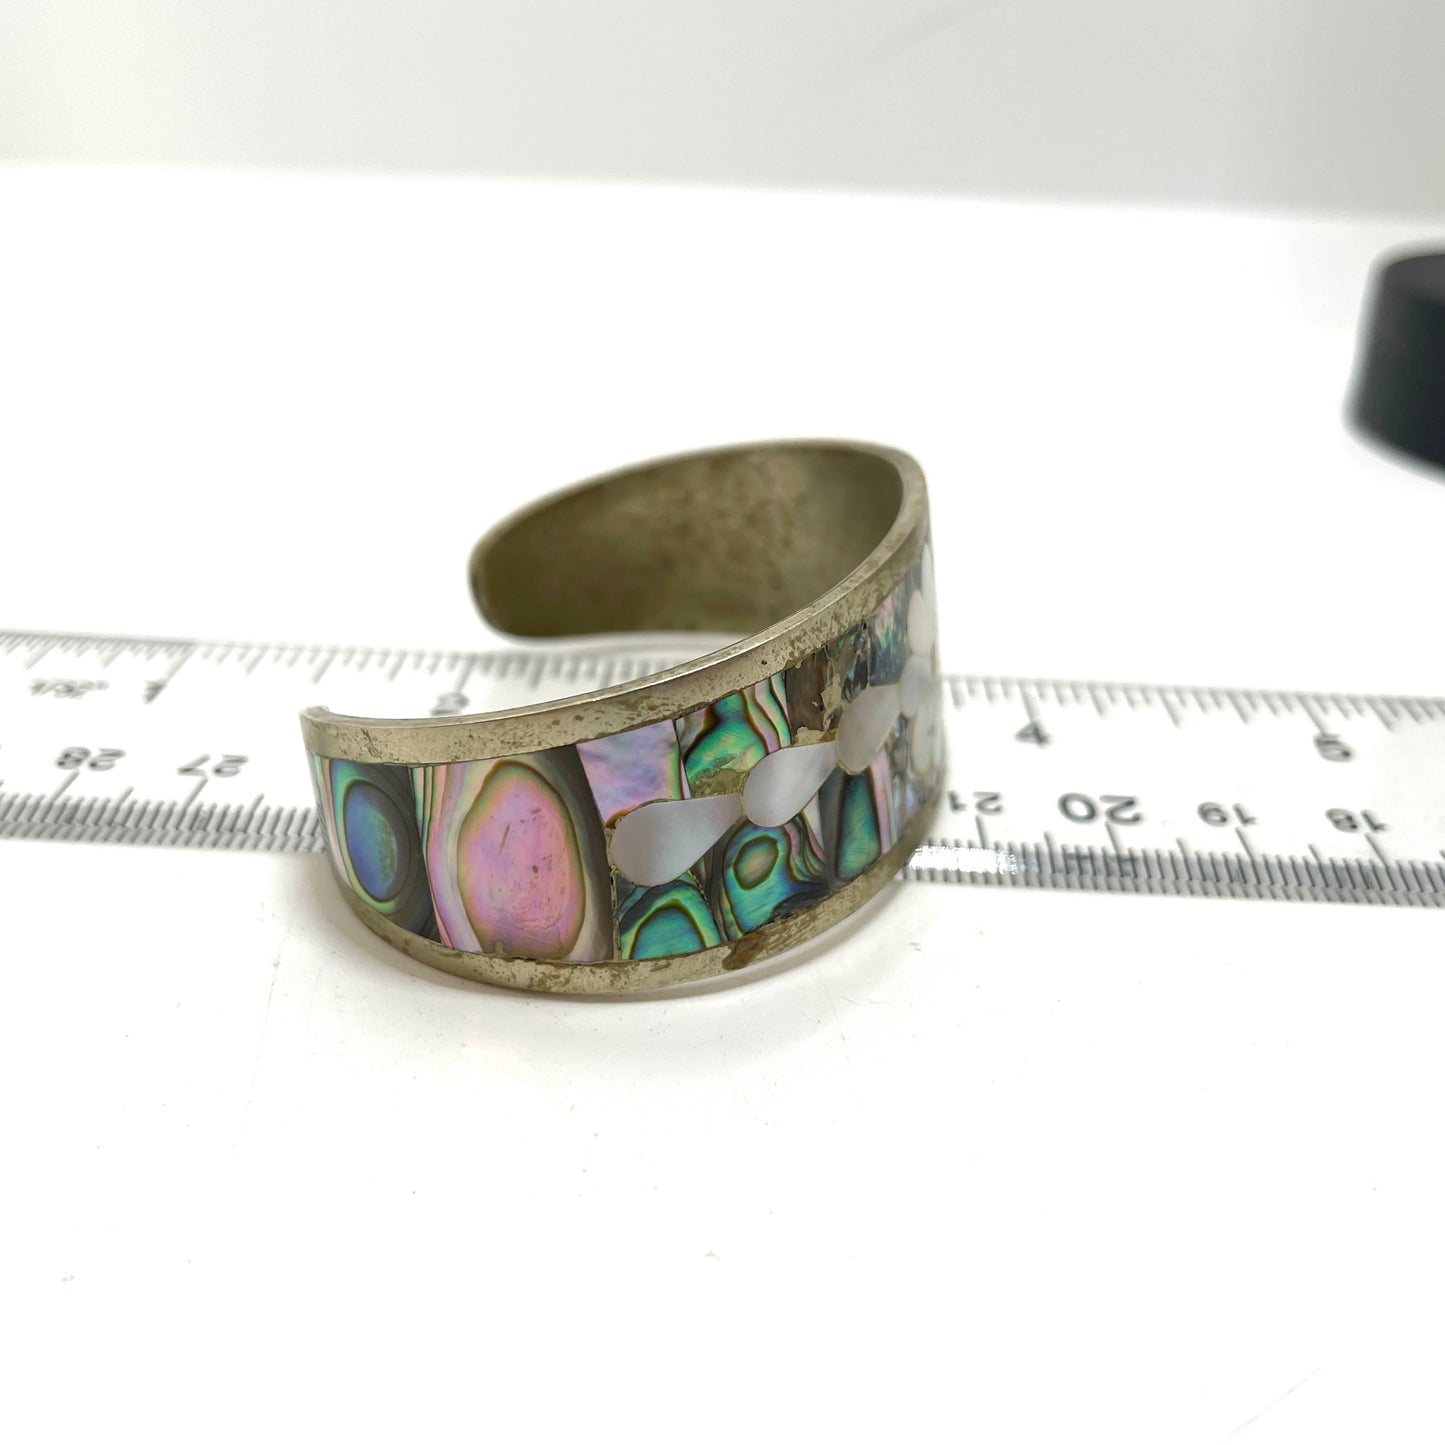 Vintage Mexican Shell Inlay Child's Bracelet